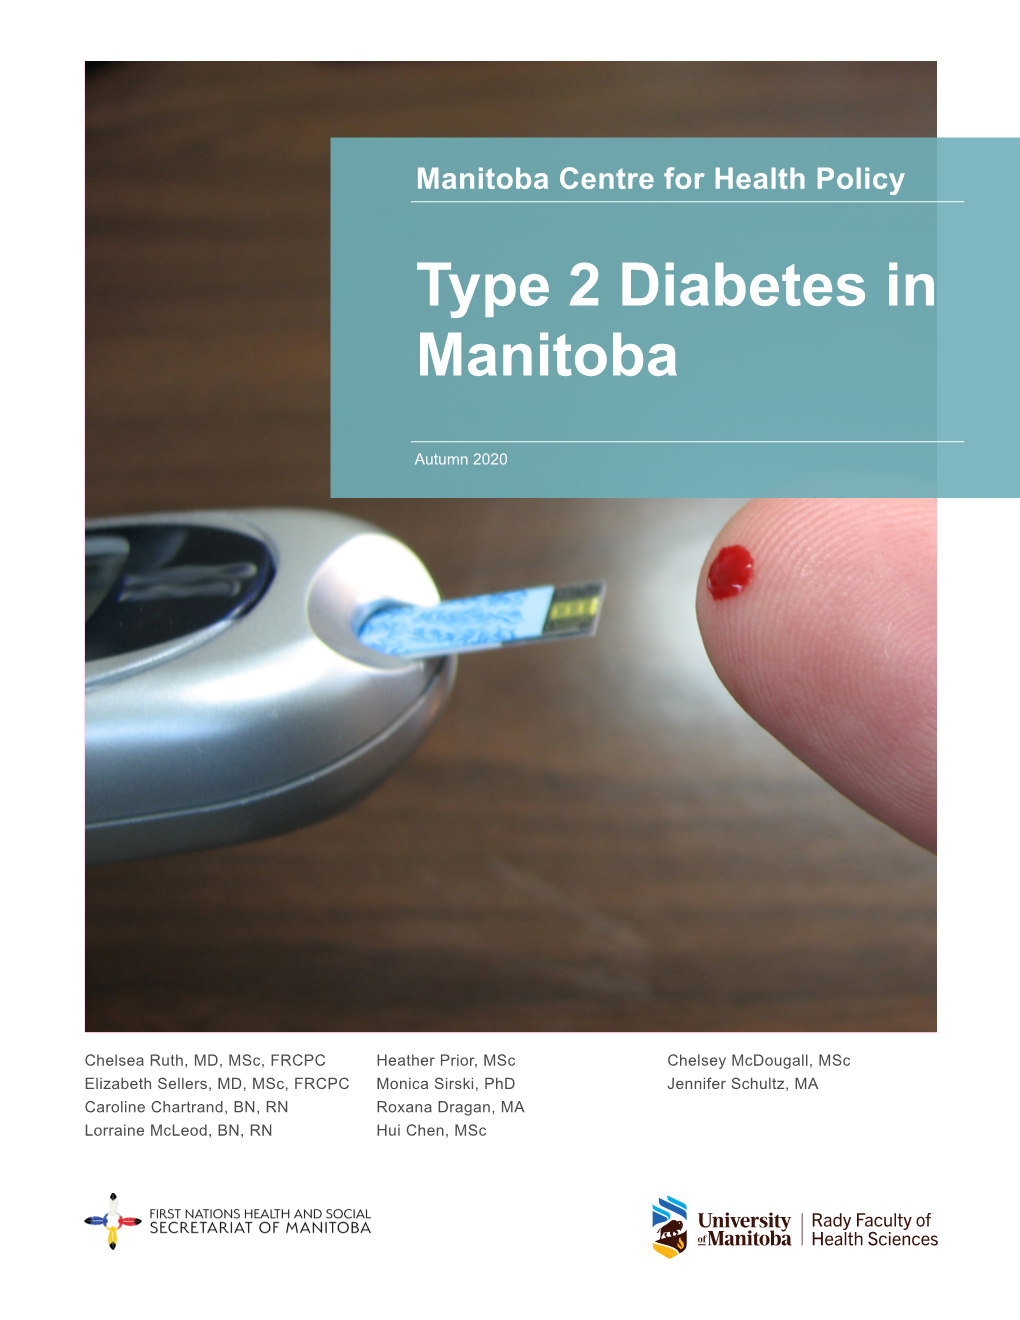 Report Is Produced and Published by the Manitoba Centre for Health Policy (MCHP)